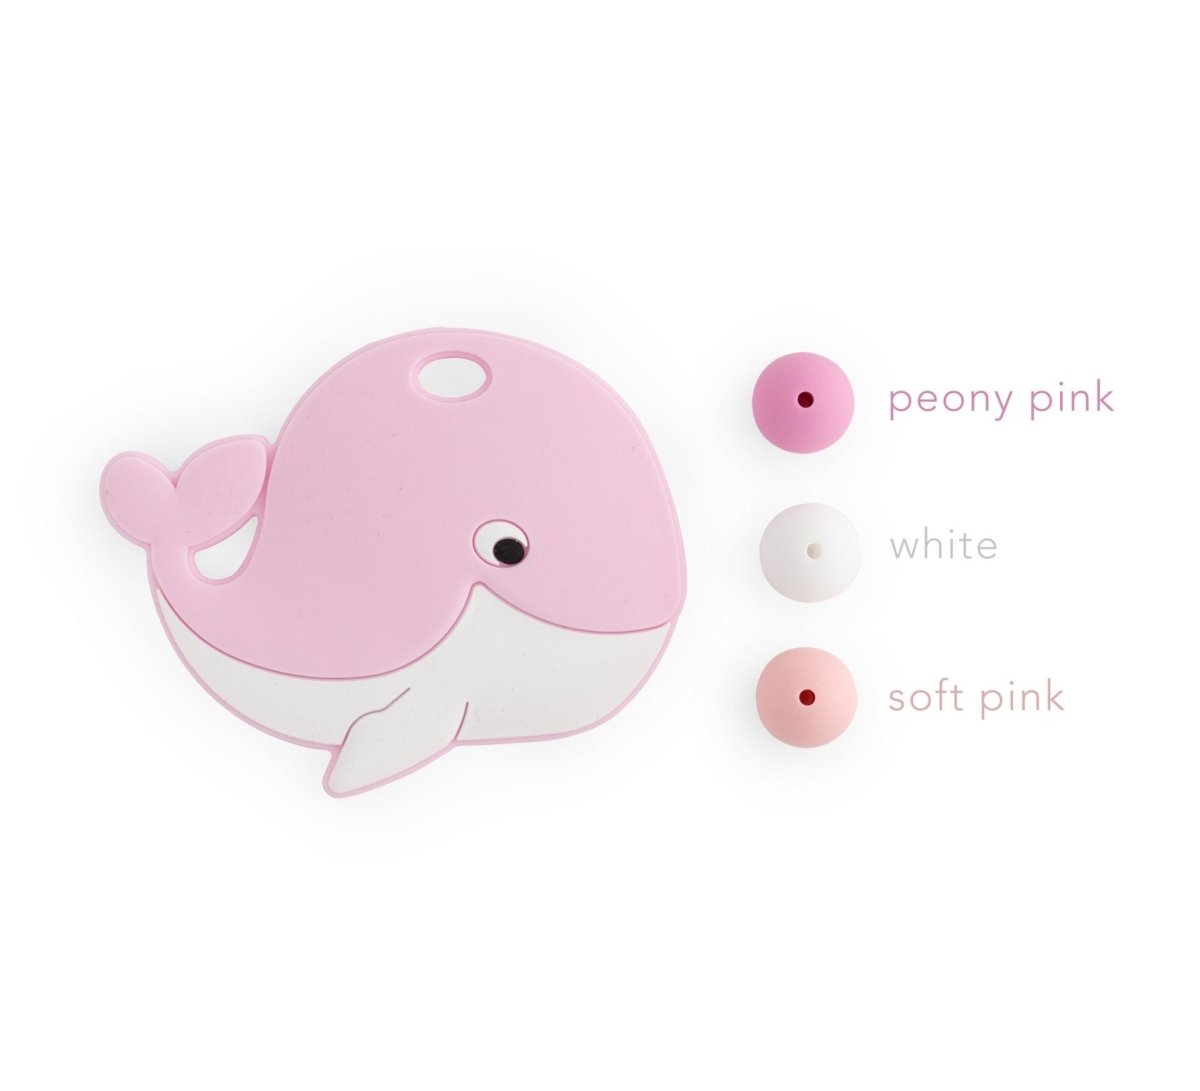 Silicone Teethers and Pendants Whales Light Pink from Cara & Co Craft Supply